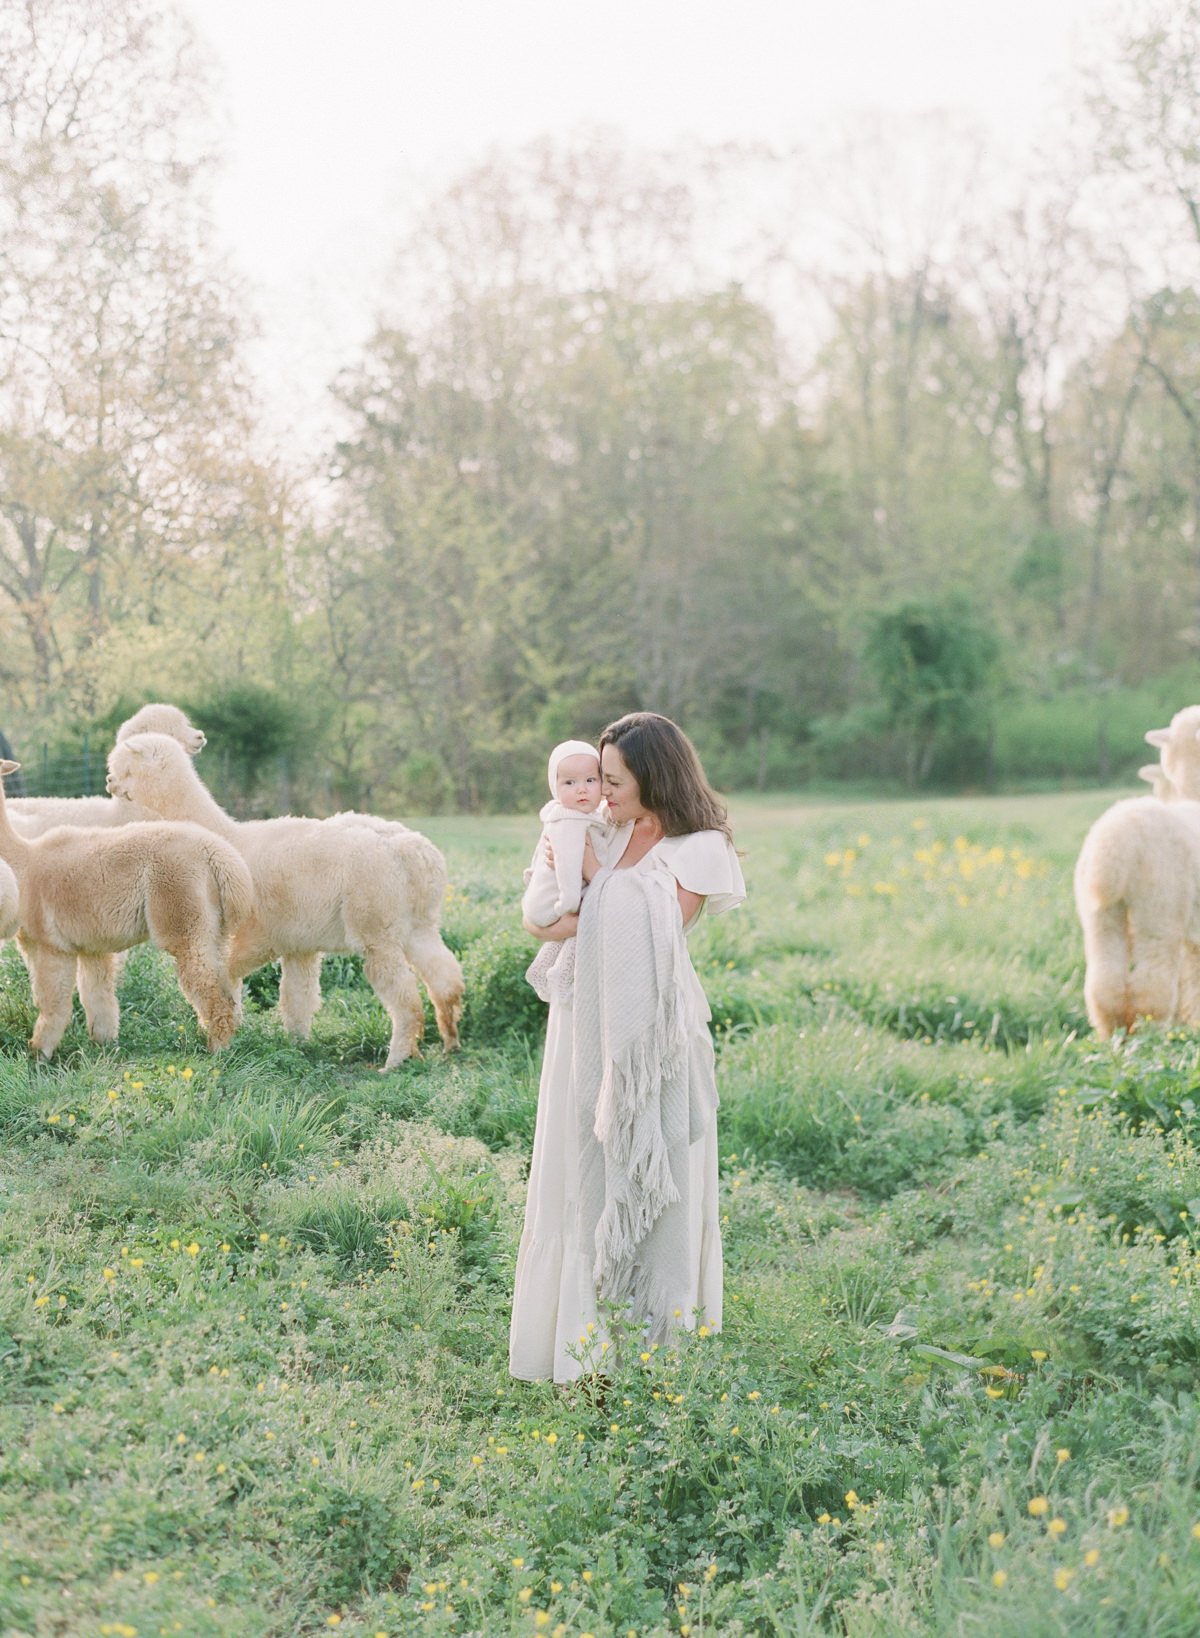 Kent-Avenue-Photography-Charlotte-Newborn-Photographers-On-Film-Mother-and-child-in-field-with-alpacas